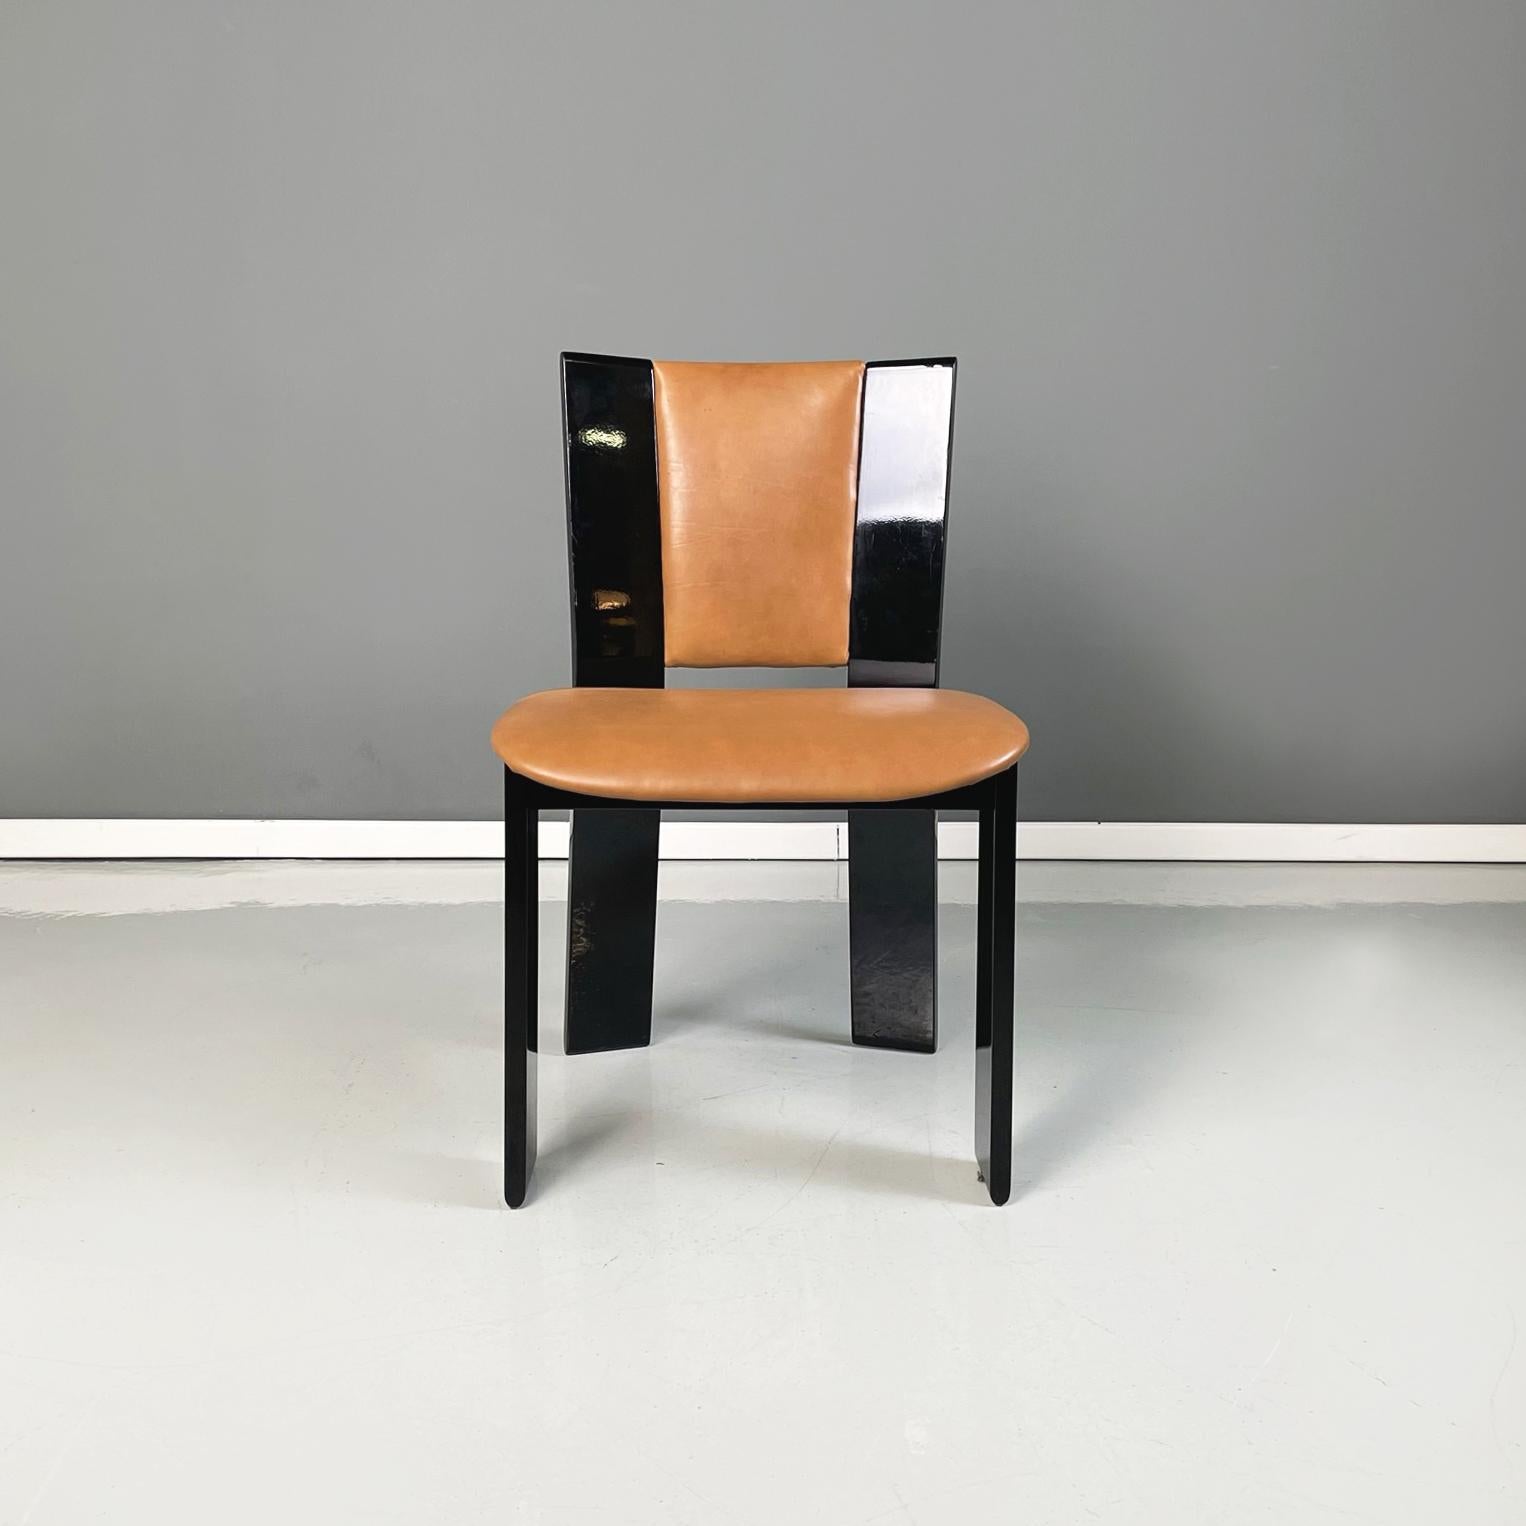 Italian Modern Black Lacquered Brown Leather Chairs Acerbis International, 1980s In Good Condition For Sale In MIlano, IT